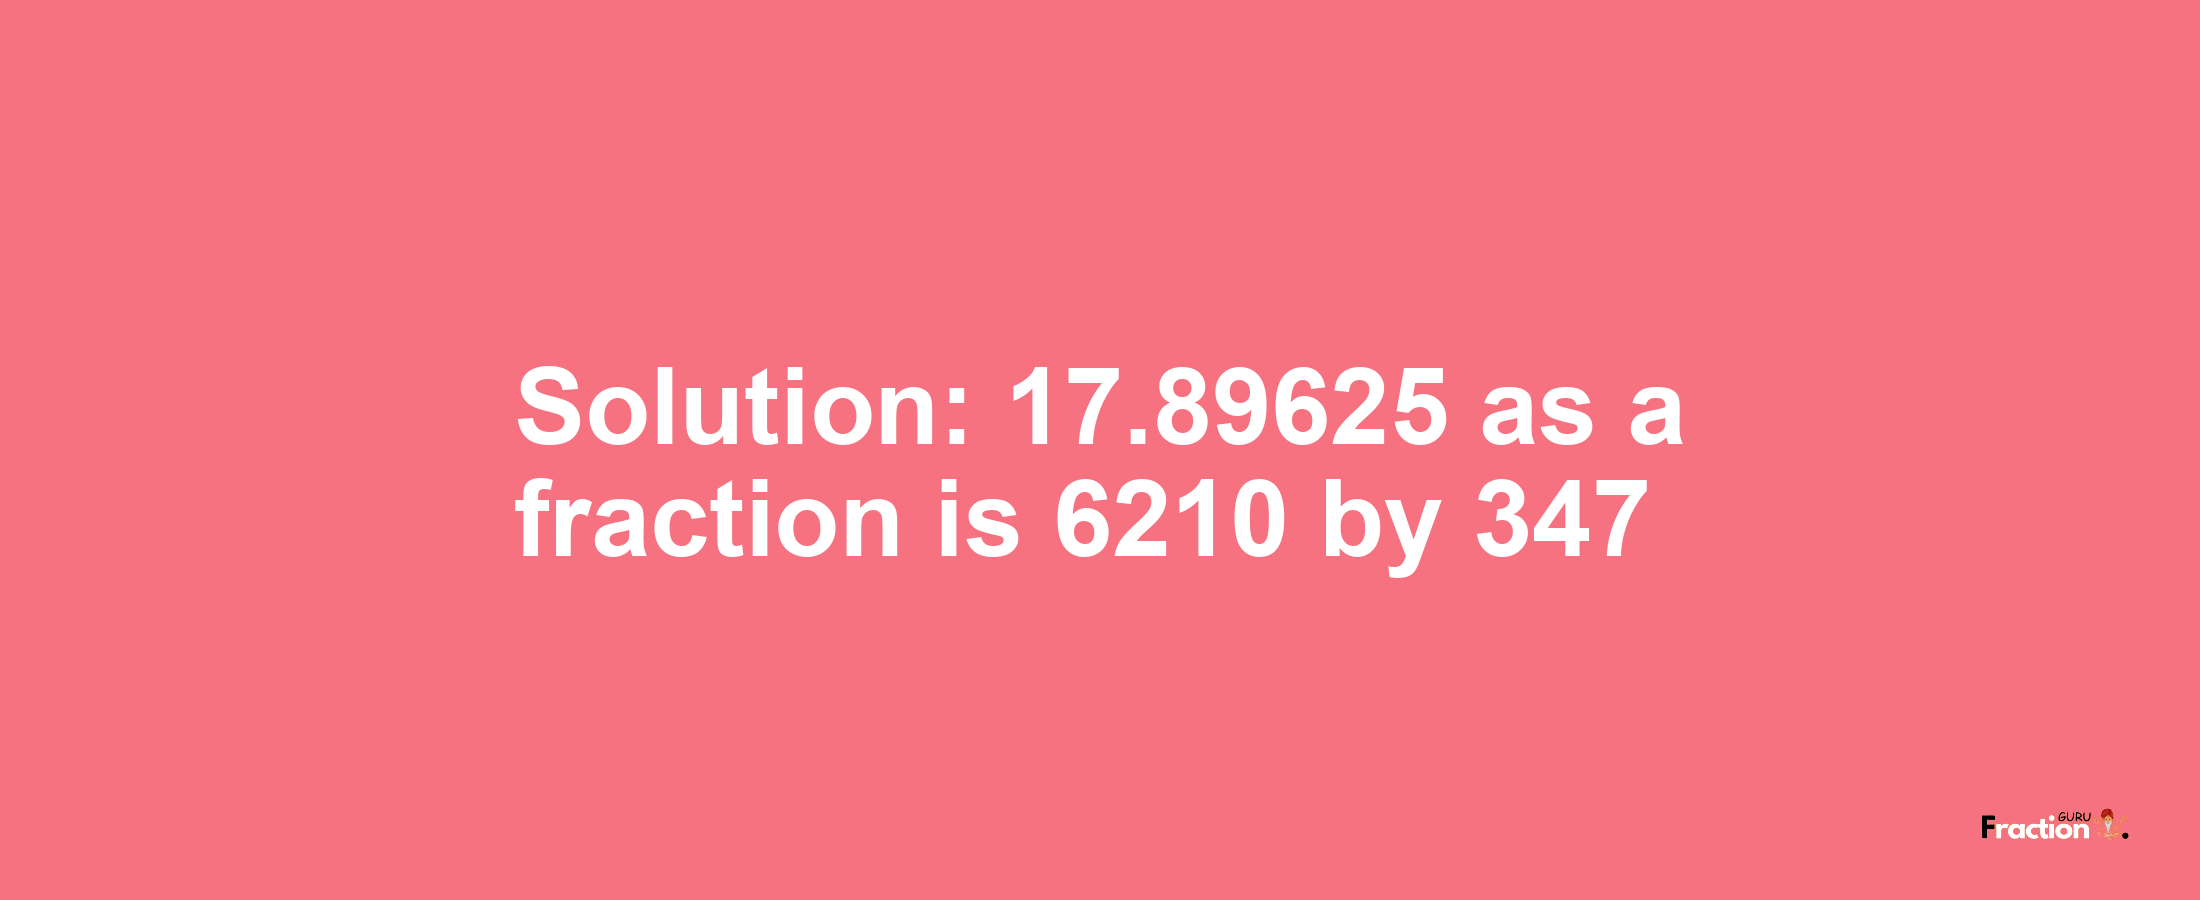 Solution:17.89625 as a fraction is 6210/347